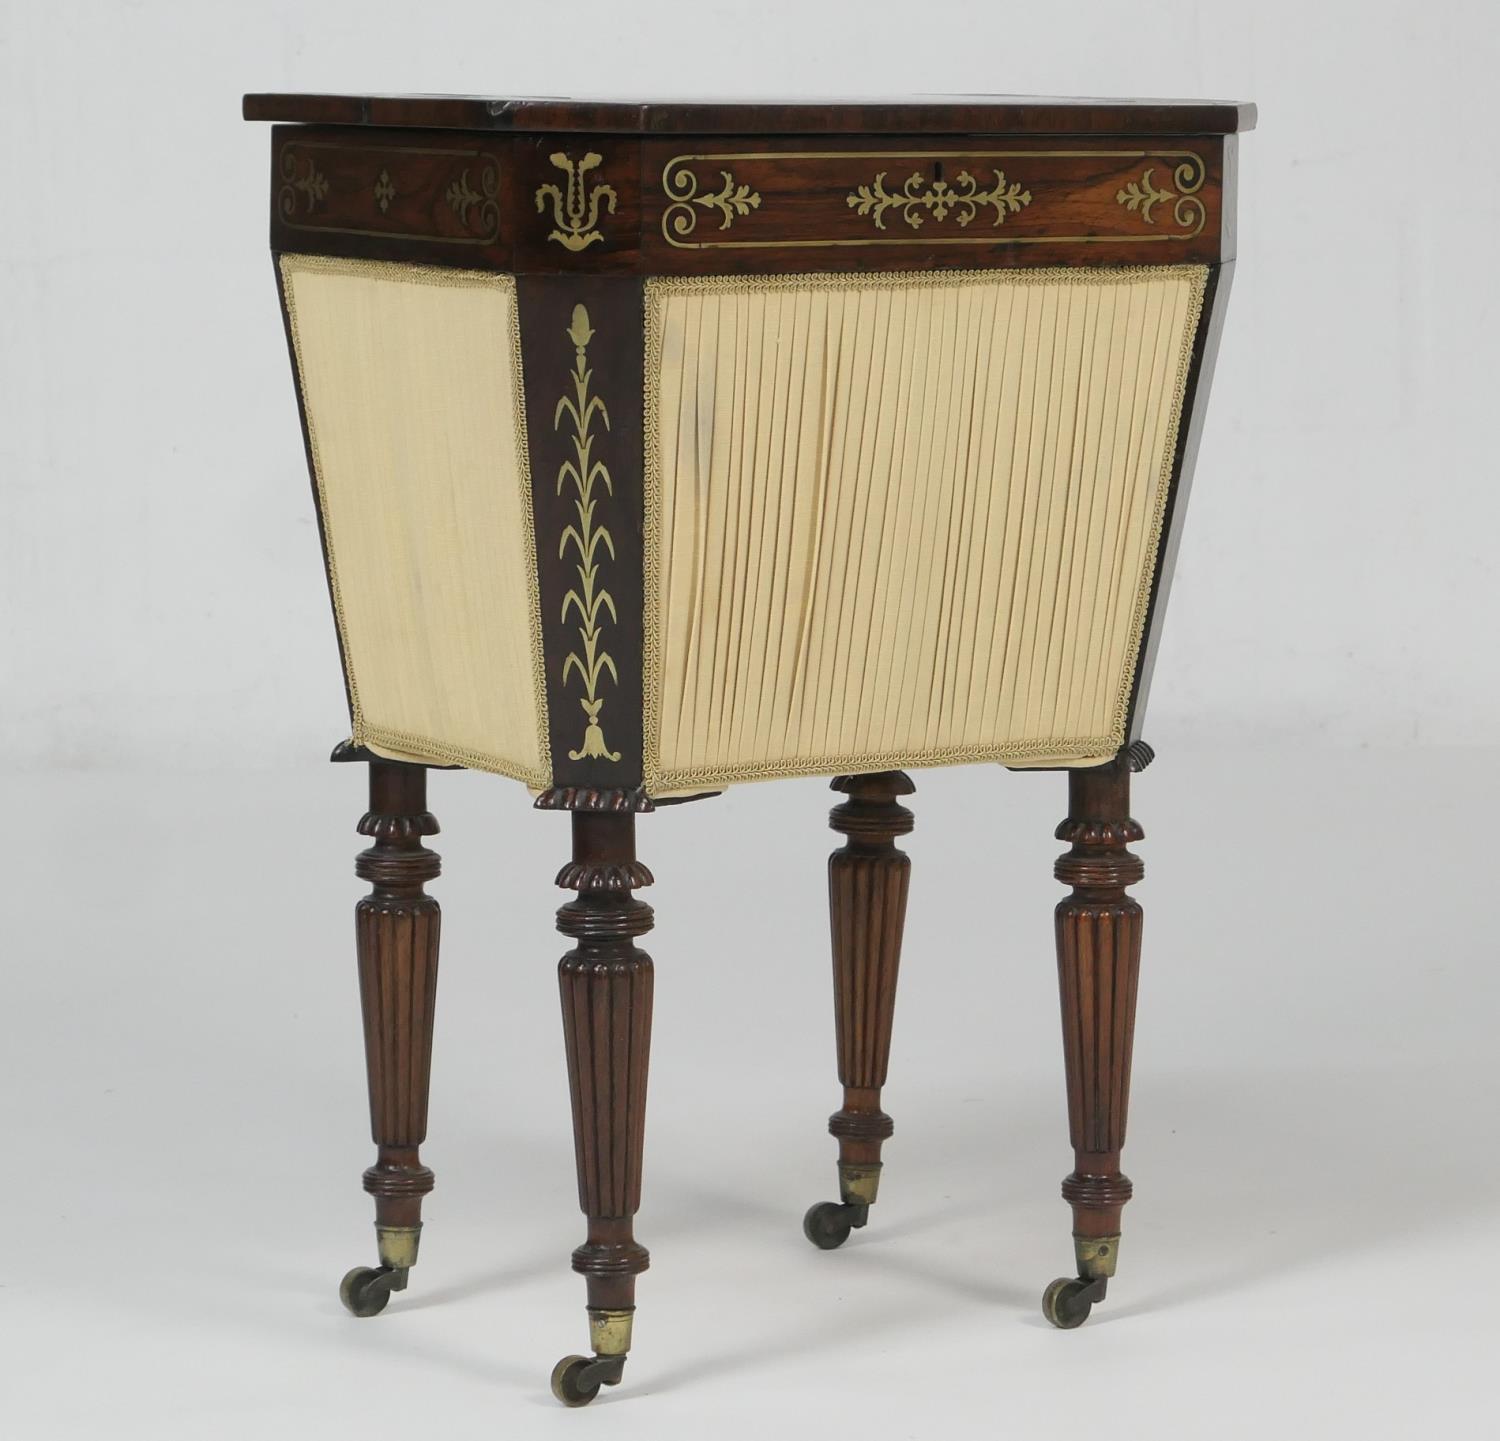 George IV rosewood and brass inlaid decanter stand or sewing box, circa 1825, the top with canted